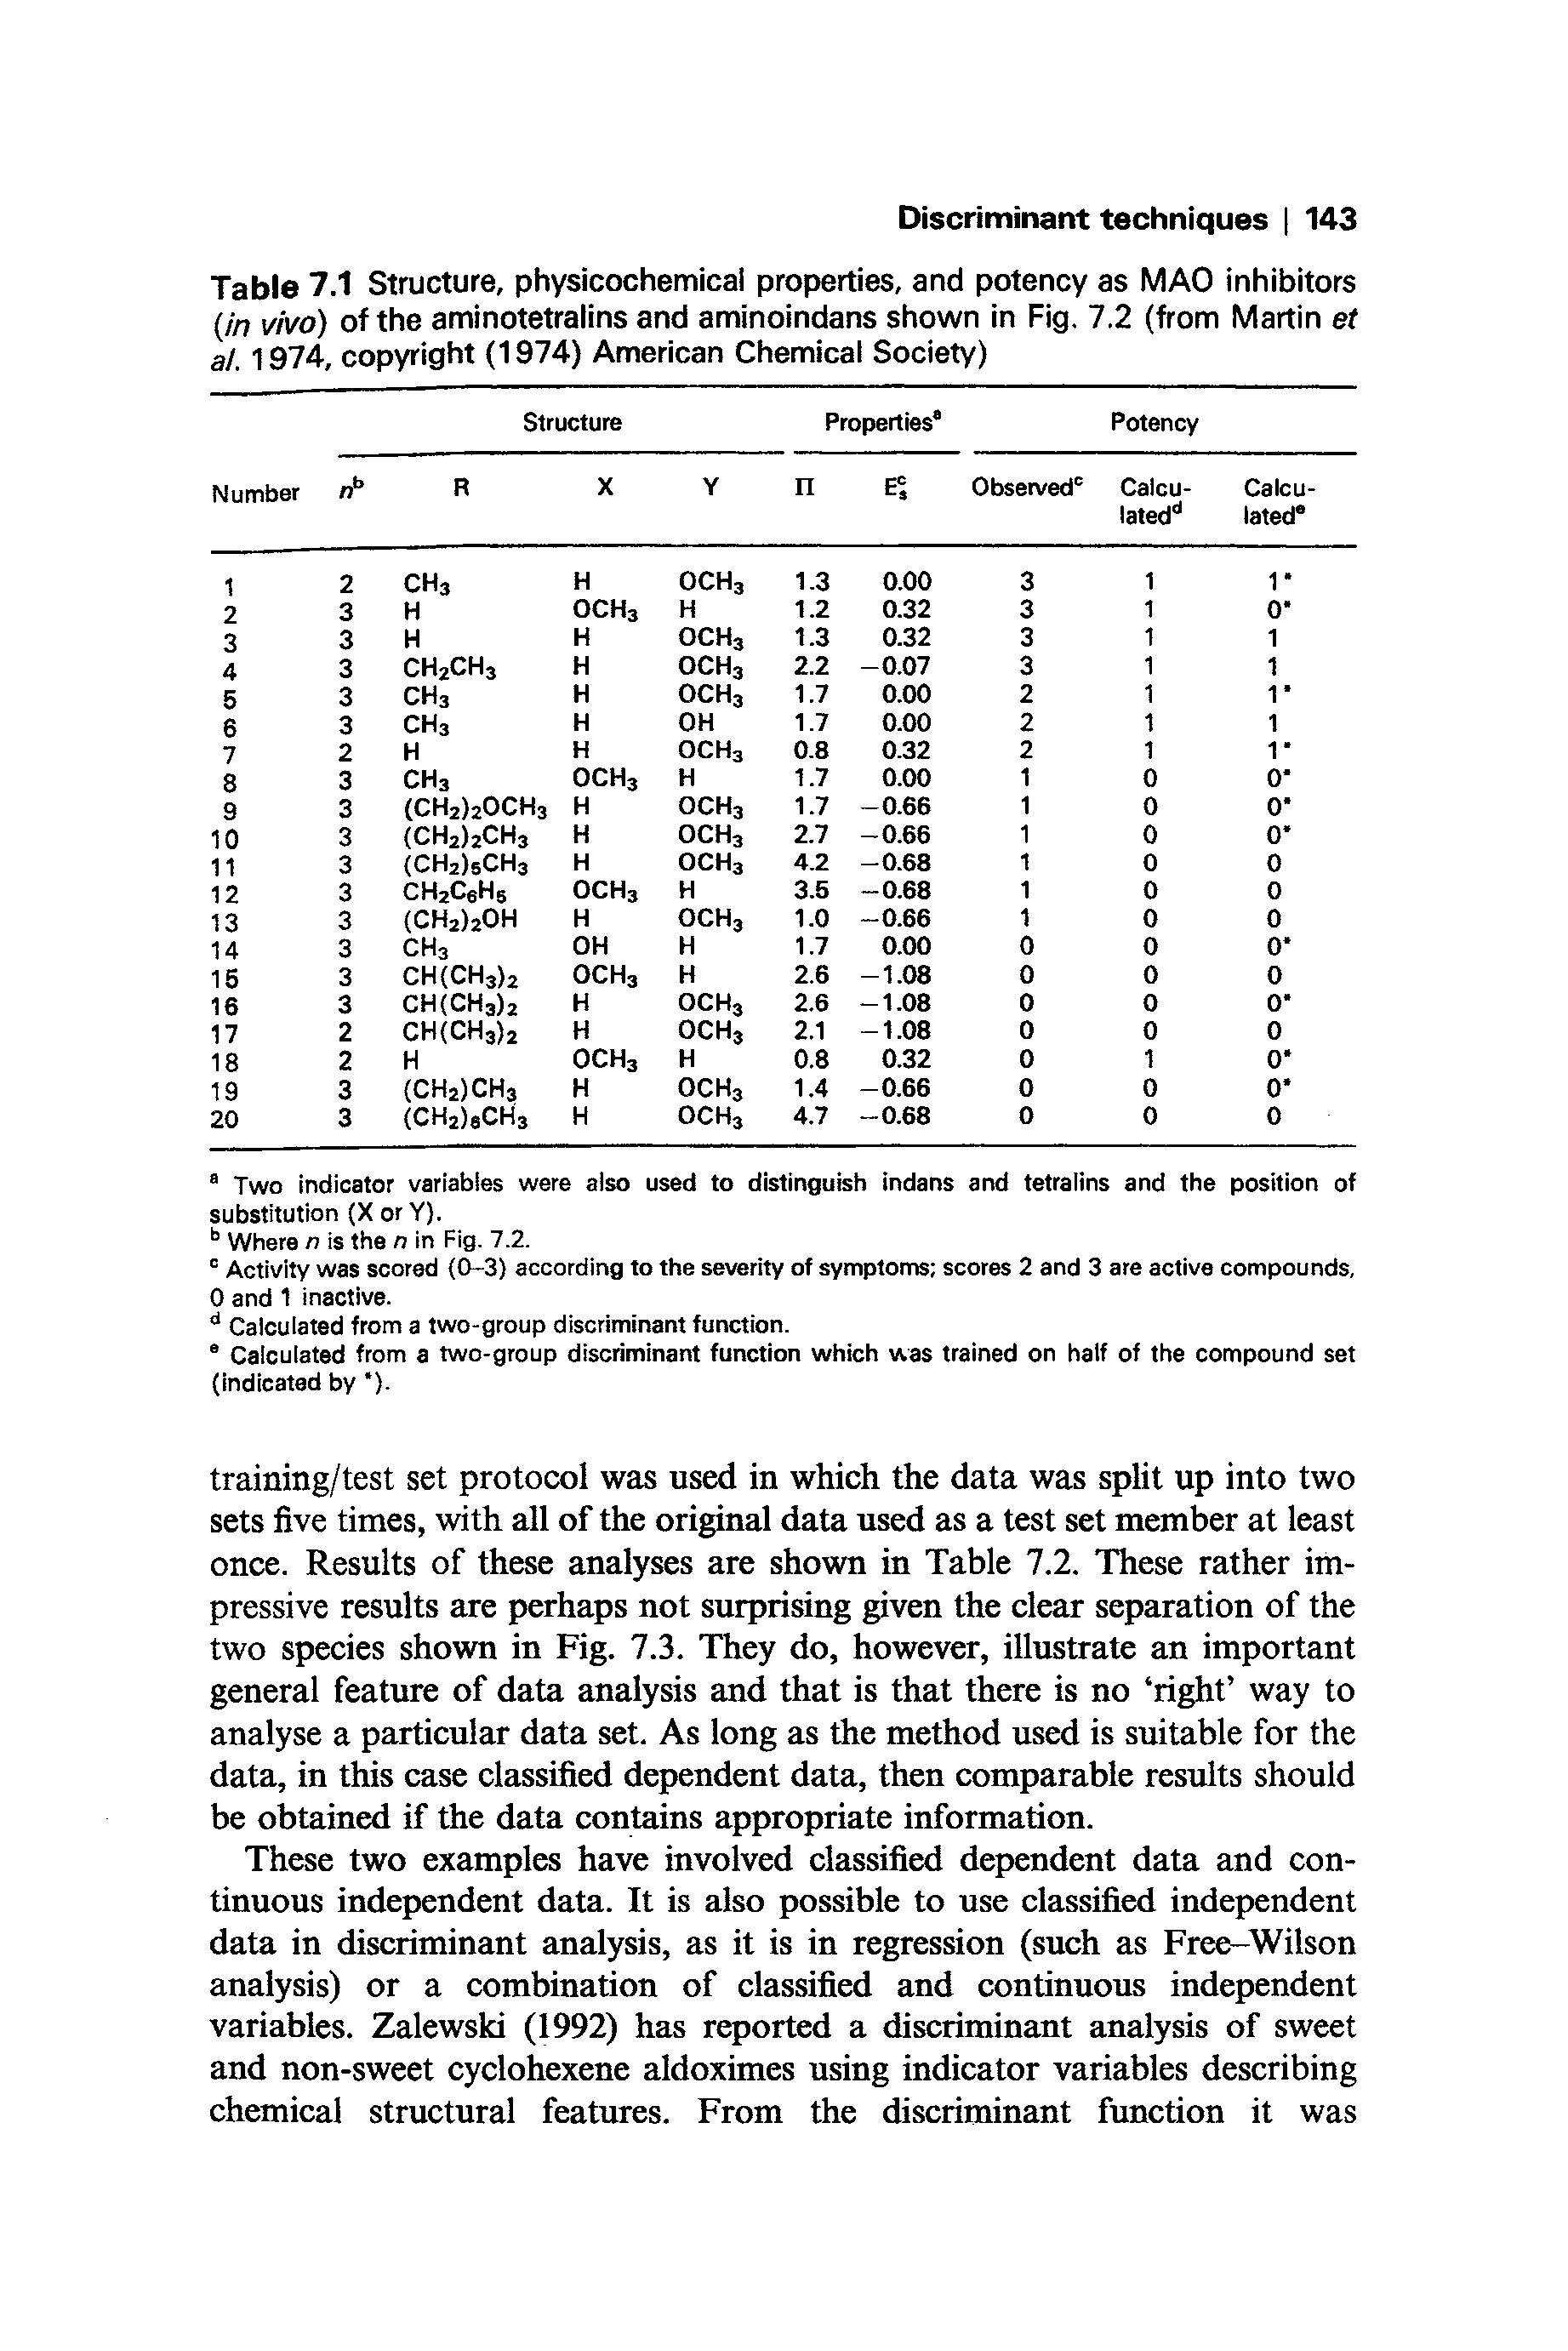 Table 7.1 Structure, physicochemical properties, and potency as MAO inhibitors in vivo) of the aminotetralins and aminoindans shown in Fig. 7.2 (from Martin et al. 1974, copyright (1974) American Chemical Society)...